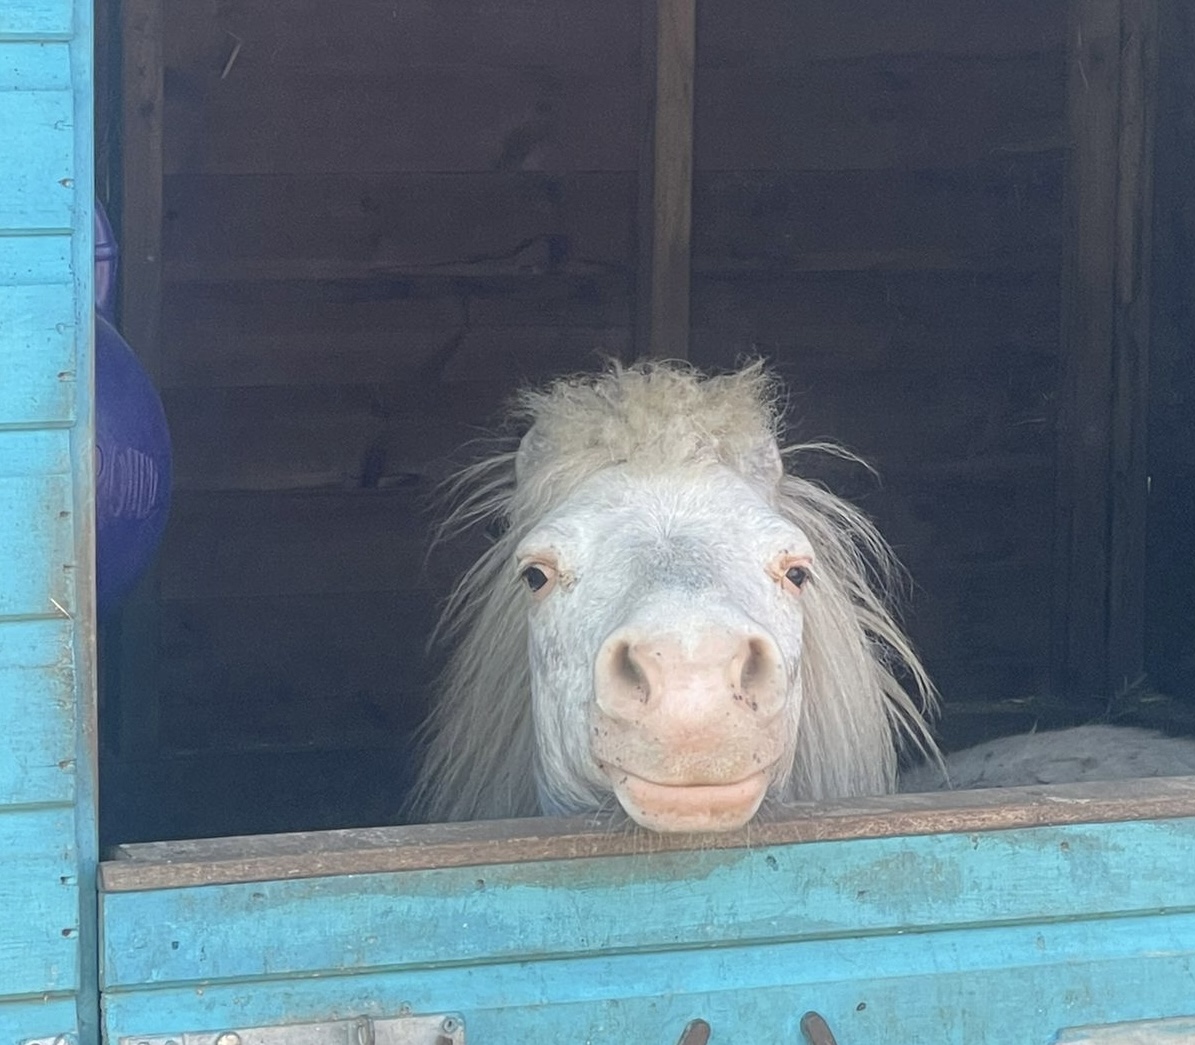 PSA: We only have five places left for our upcoming Pony Morning happening on 19th May! Find out all about this wonderful, hands-on experience for pony-fans age-6 and above via the link below: hopefield.org.uk/book-tickets/ #ponies #rescueanimal #animalcharity